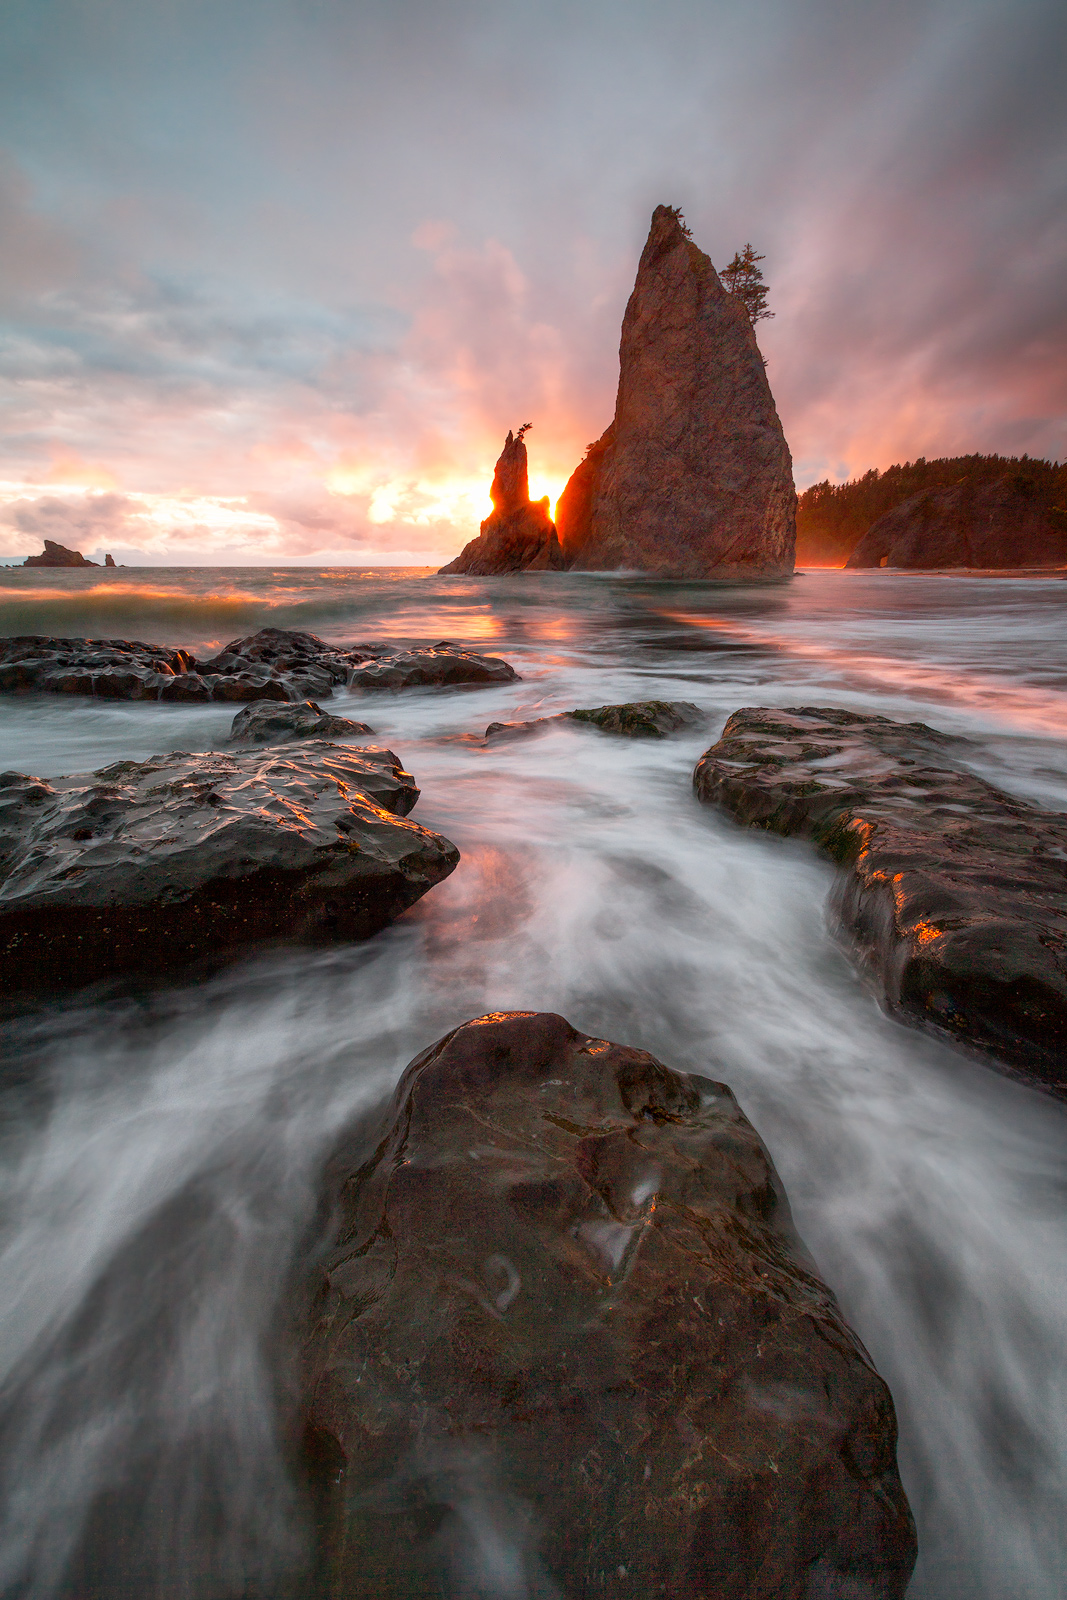 A beautiful sunset on the shores of Rialto Beach